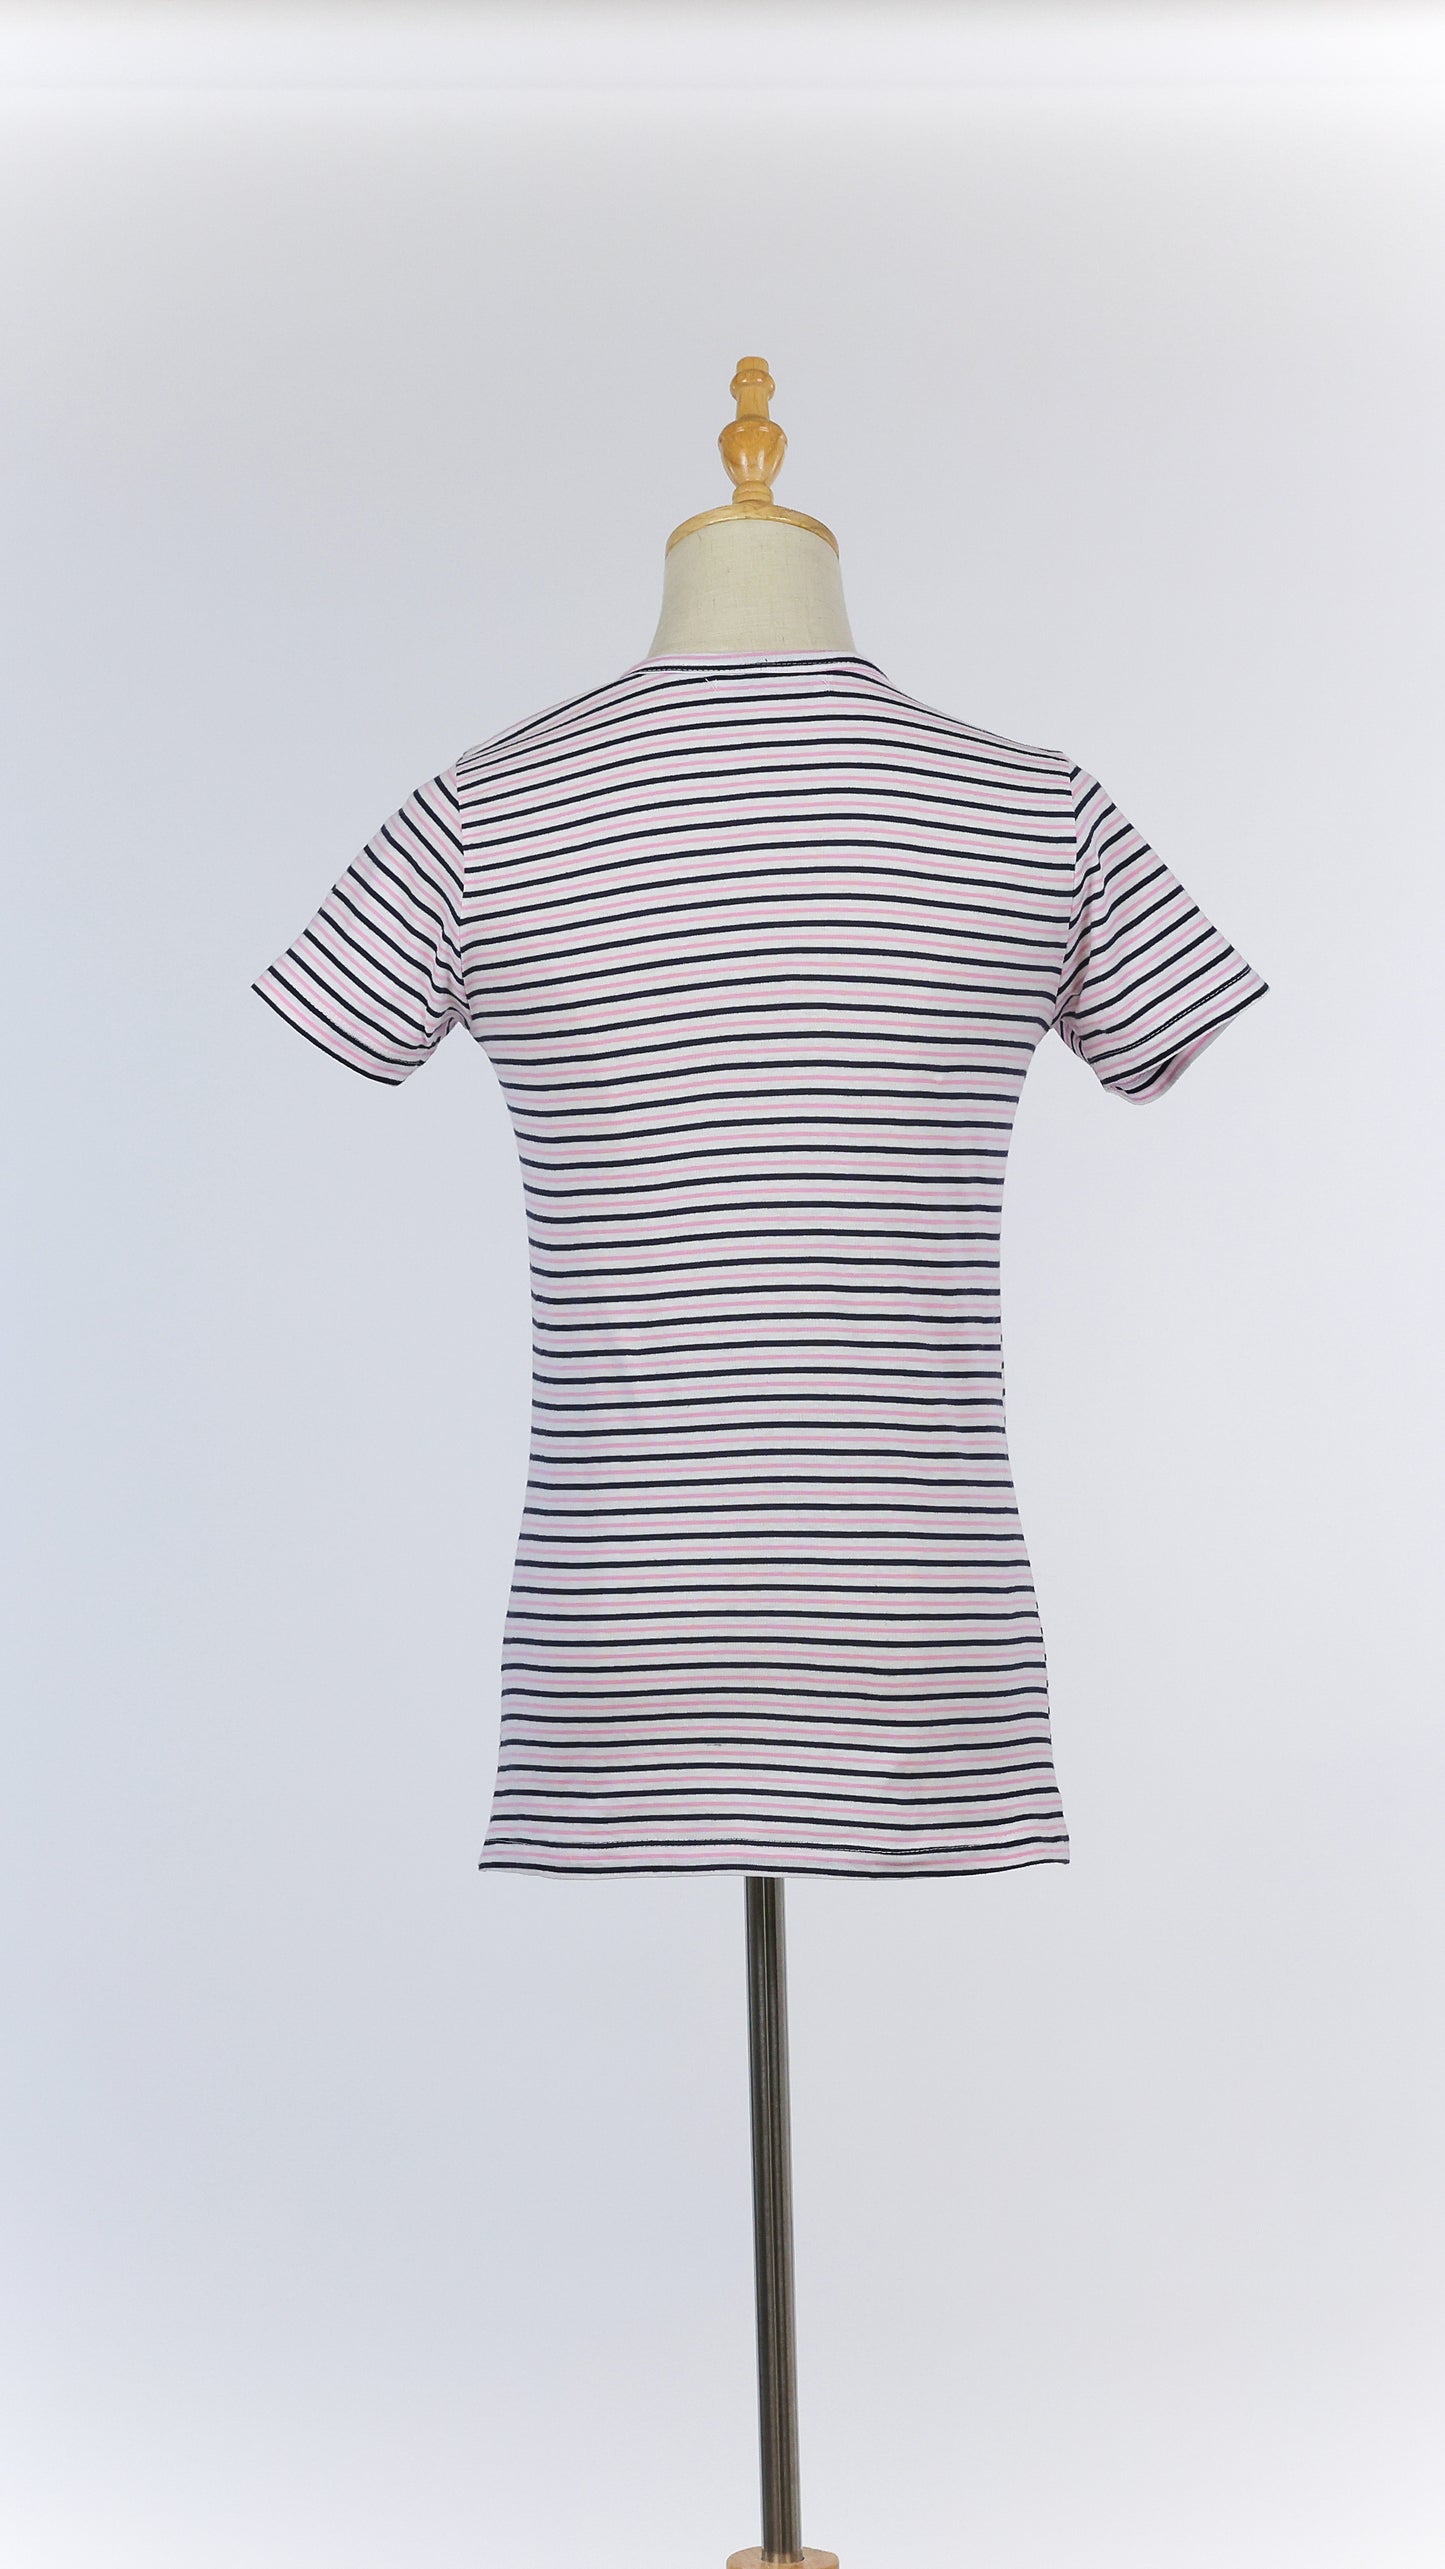 Pink and Navy Blue Striped T-shirt